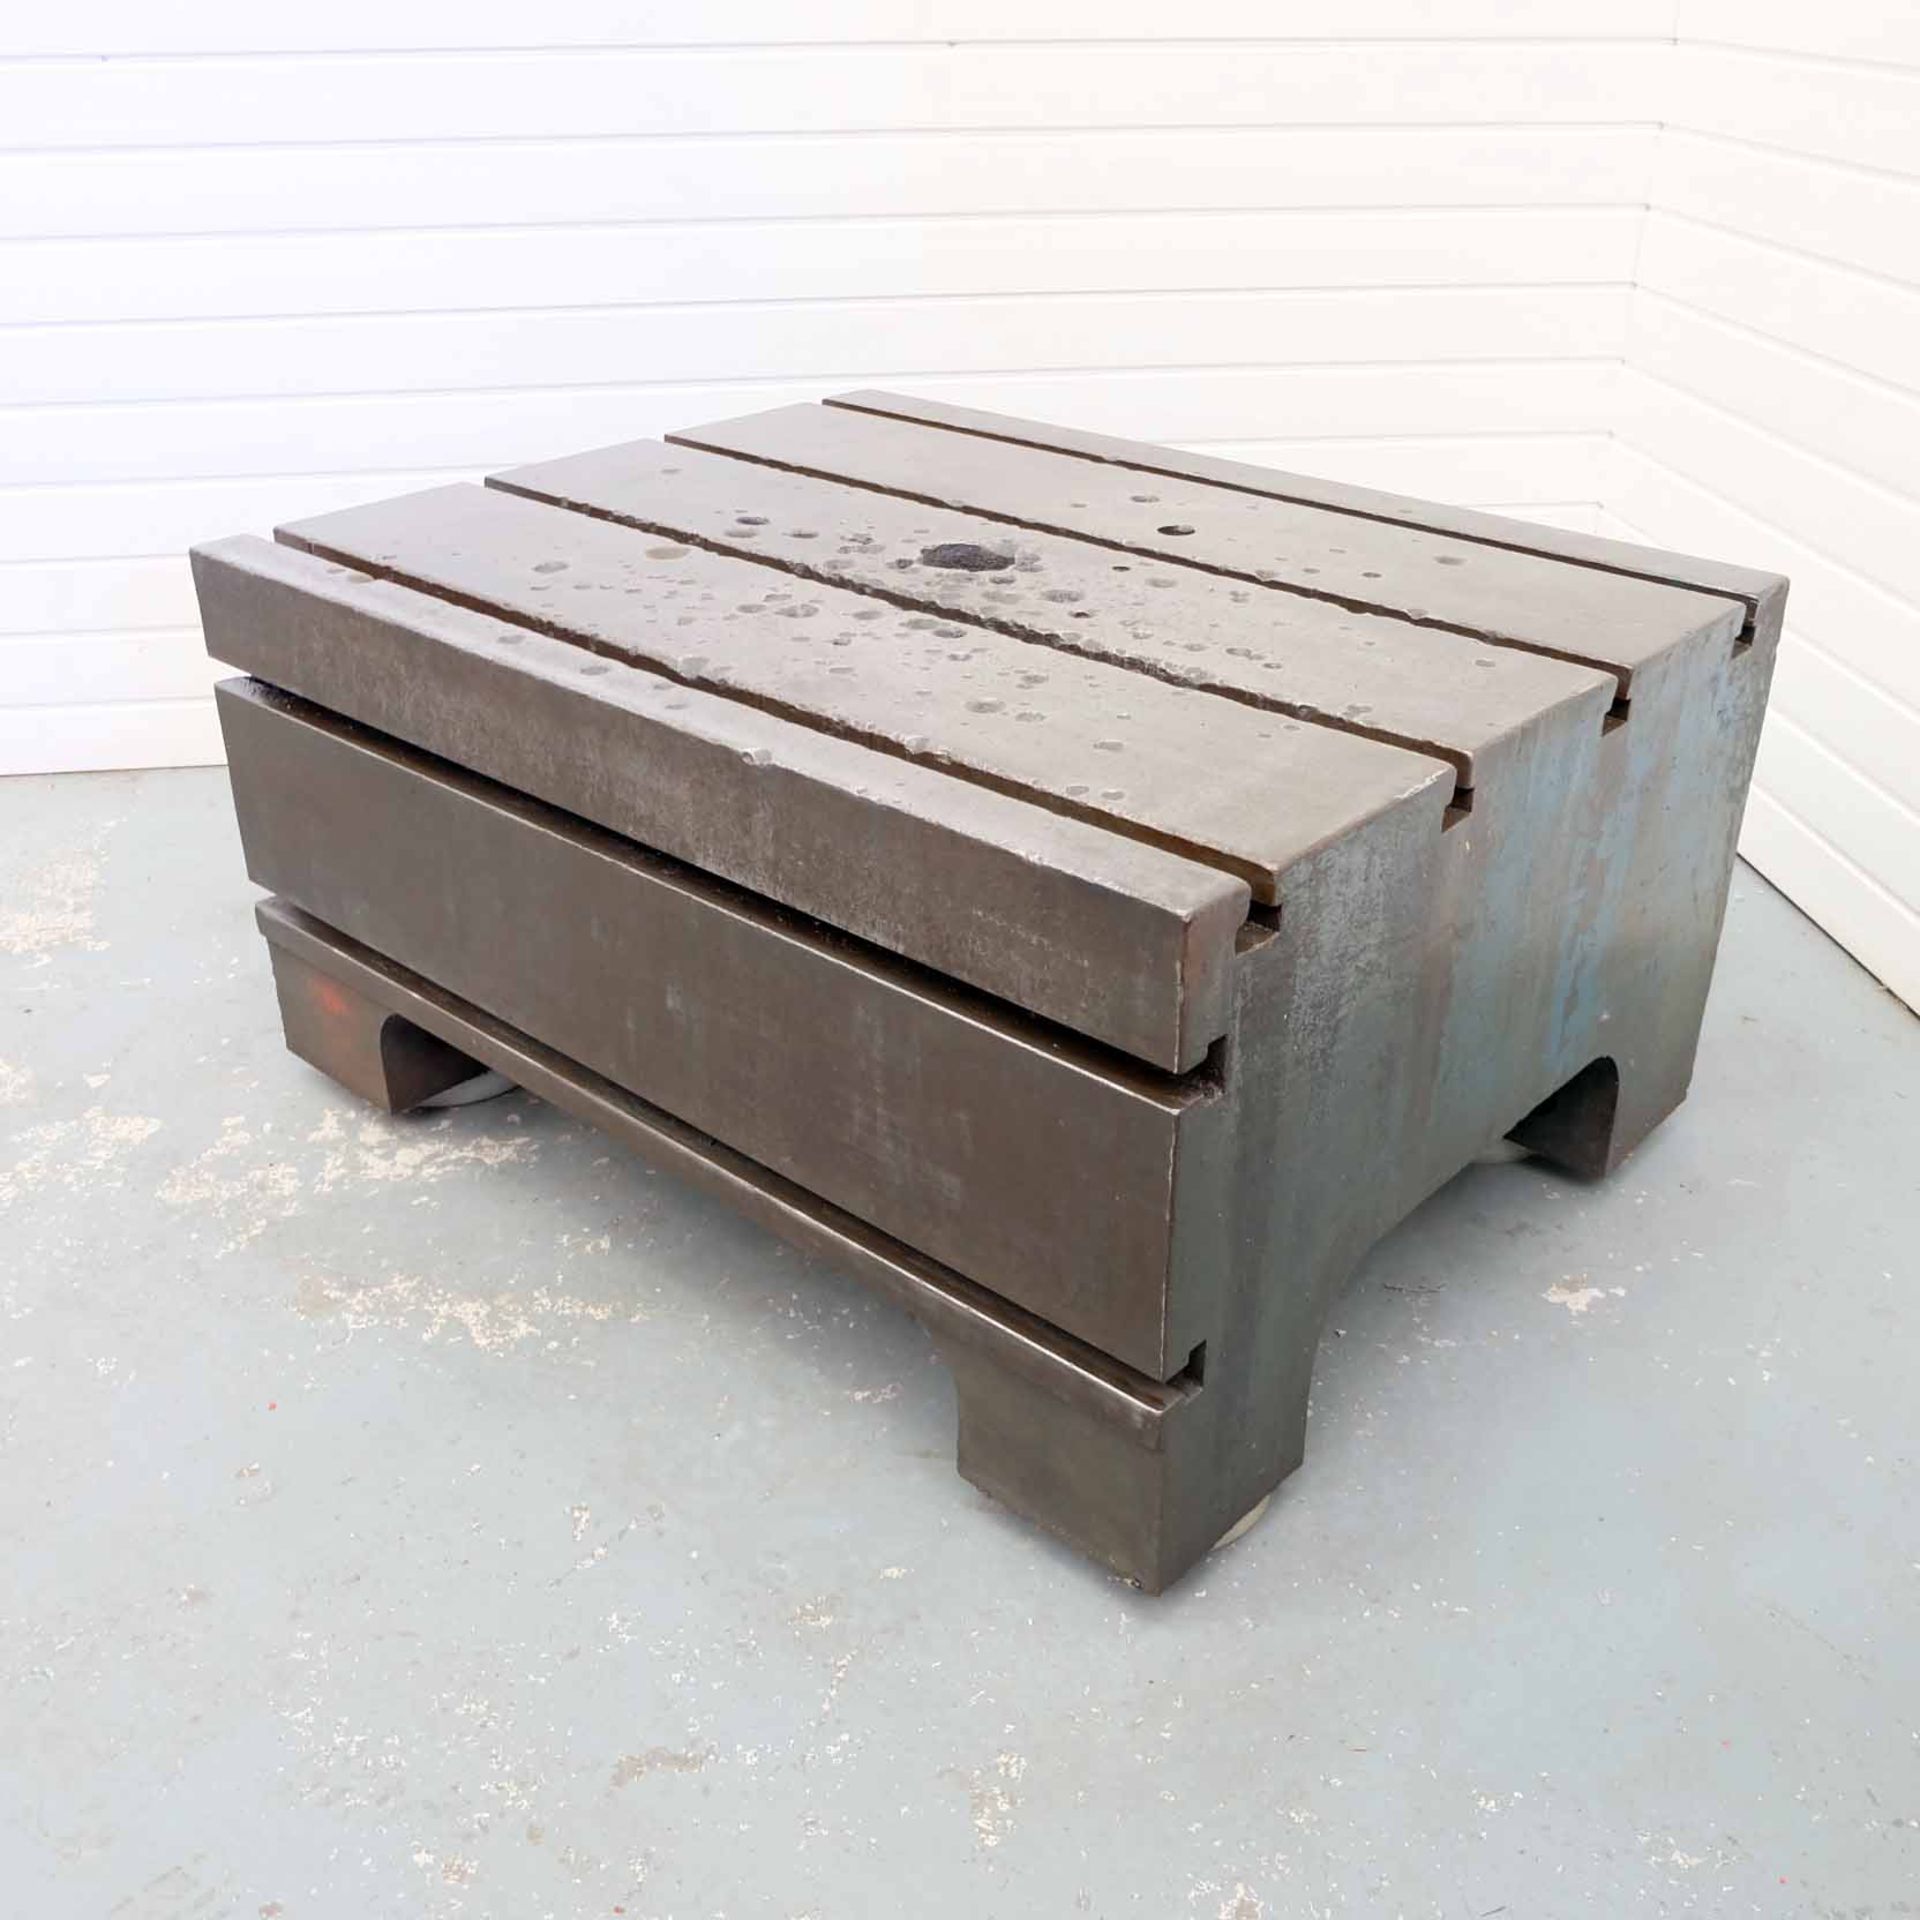 Tee Slotted Box Table. Size 42" x 33" x 20" High. 4 Tee Slots on Top. 2 Tee Slots on Front. - Bild 2 aus 4